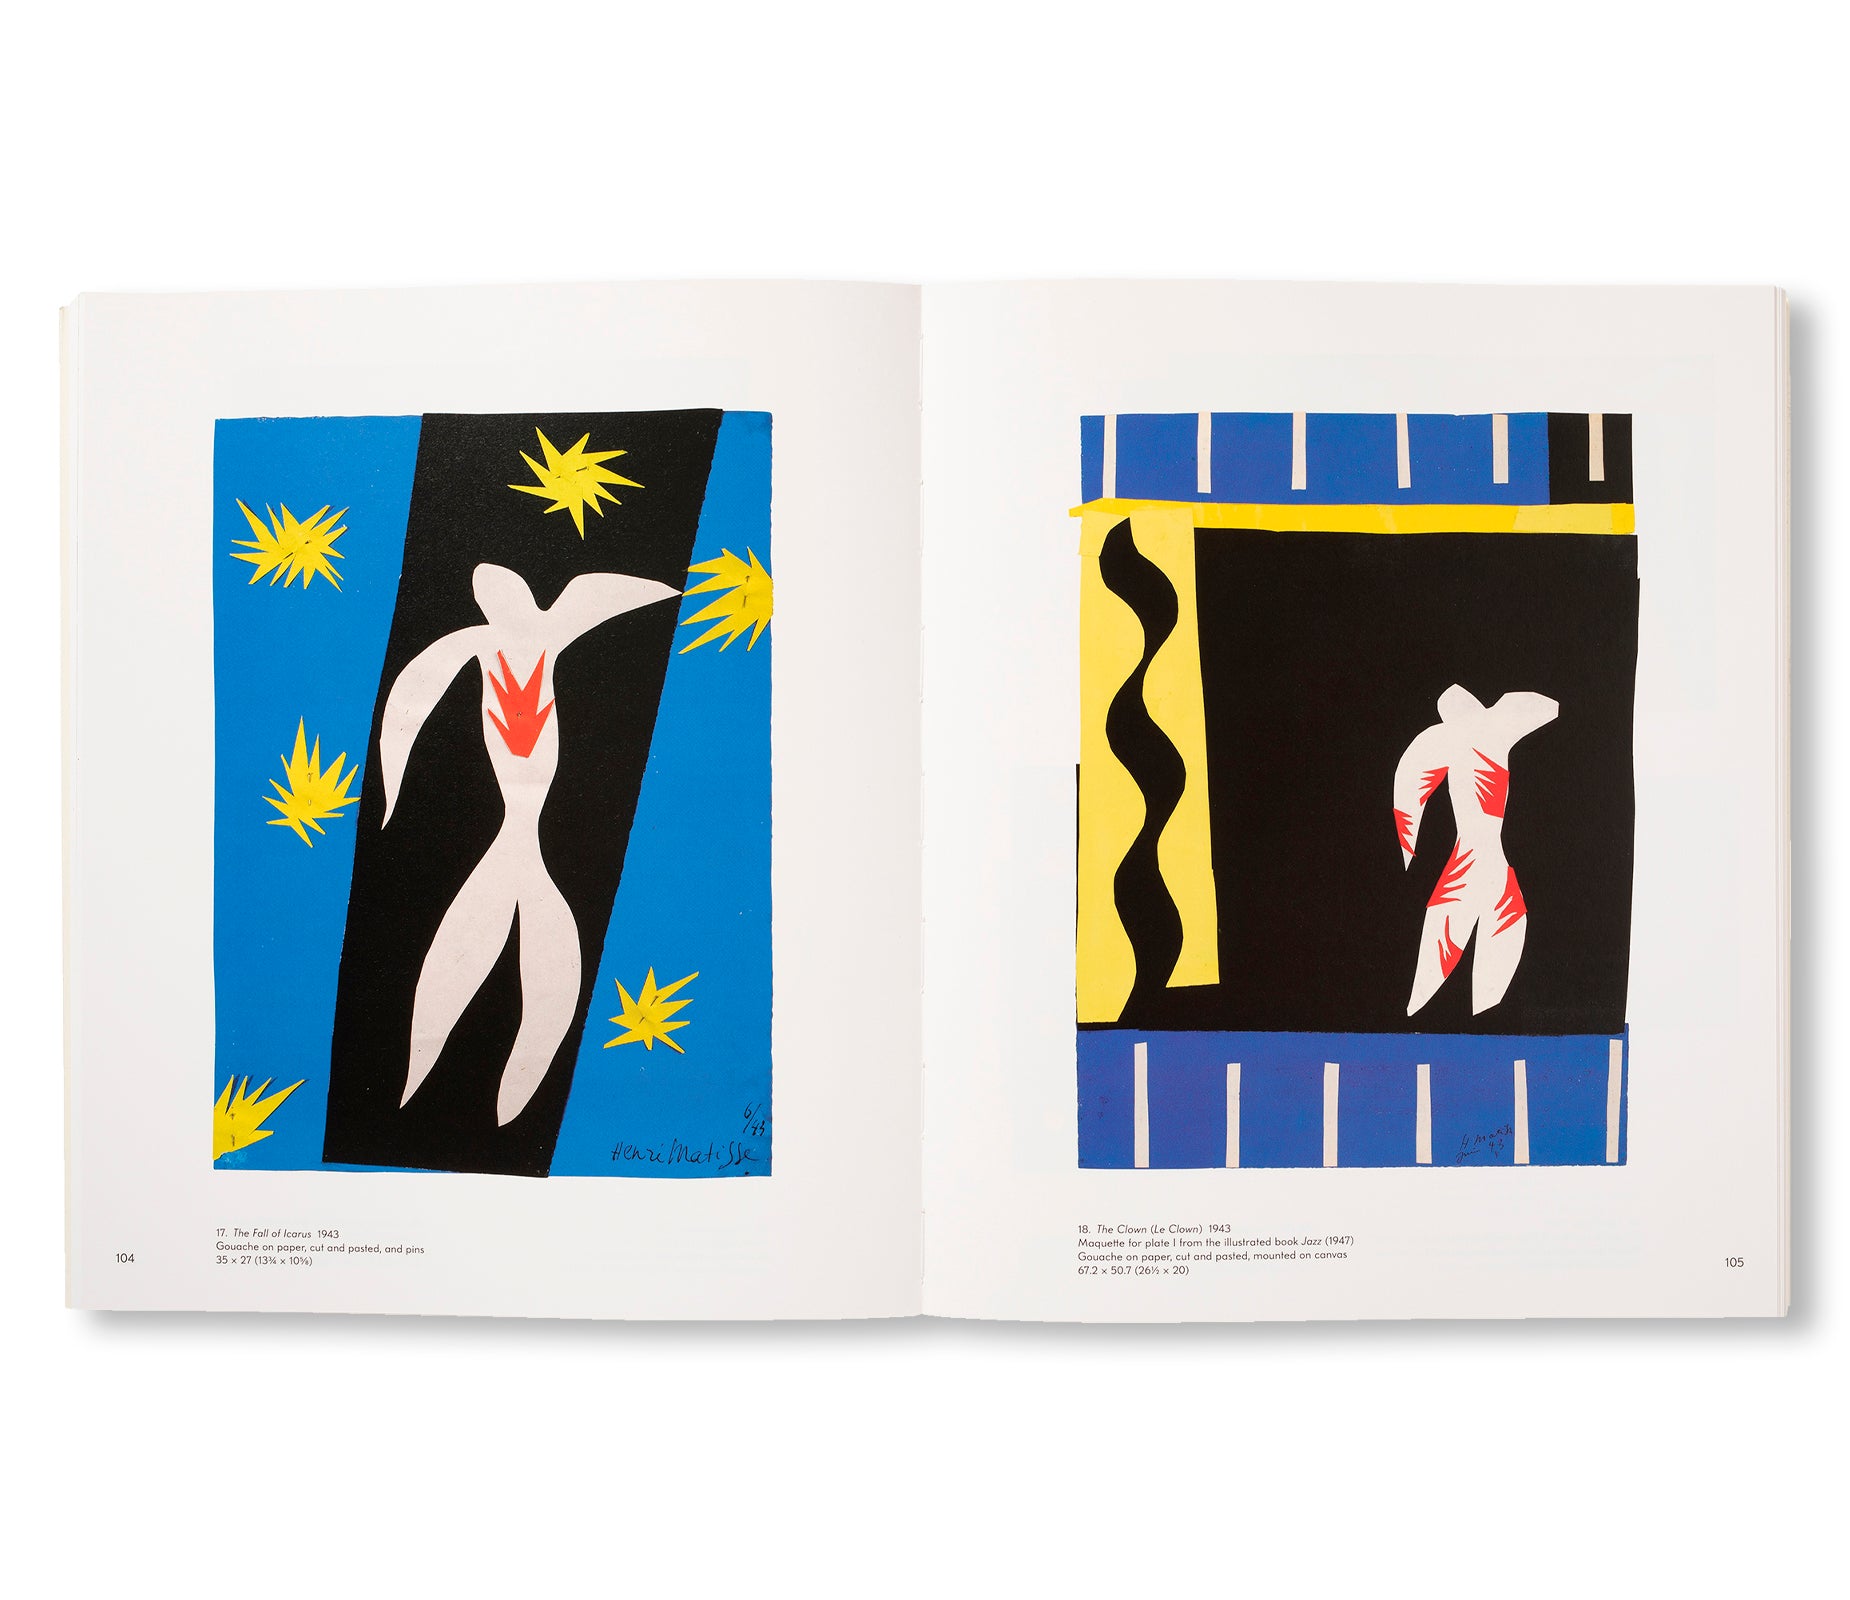 THE CUT-OUTS by Henri Matisse